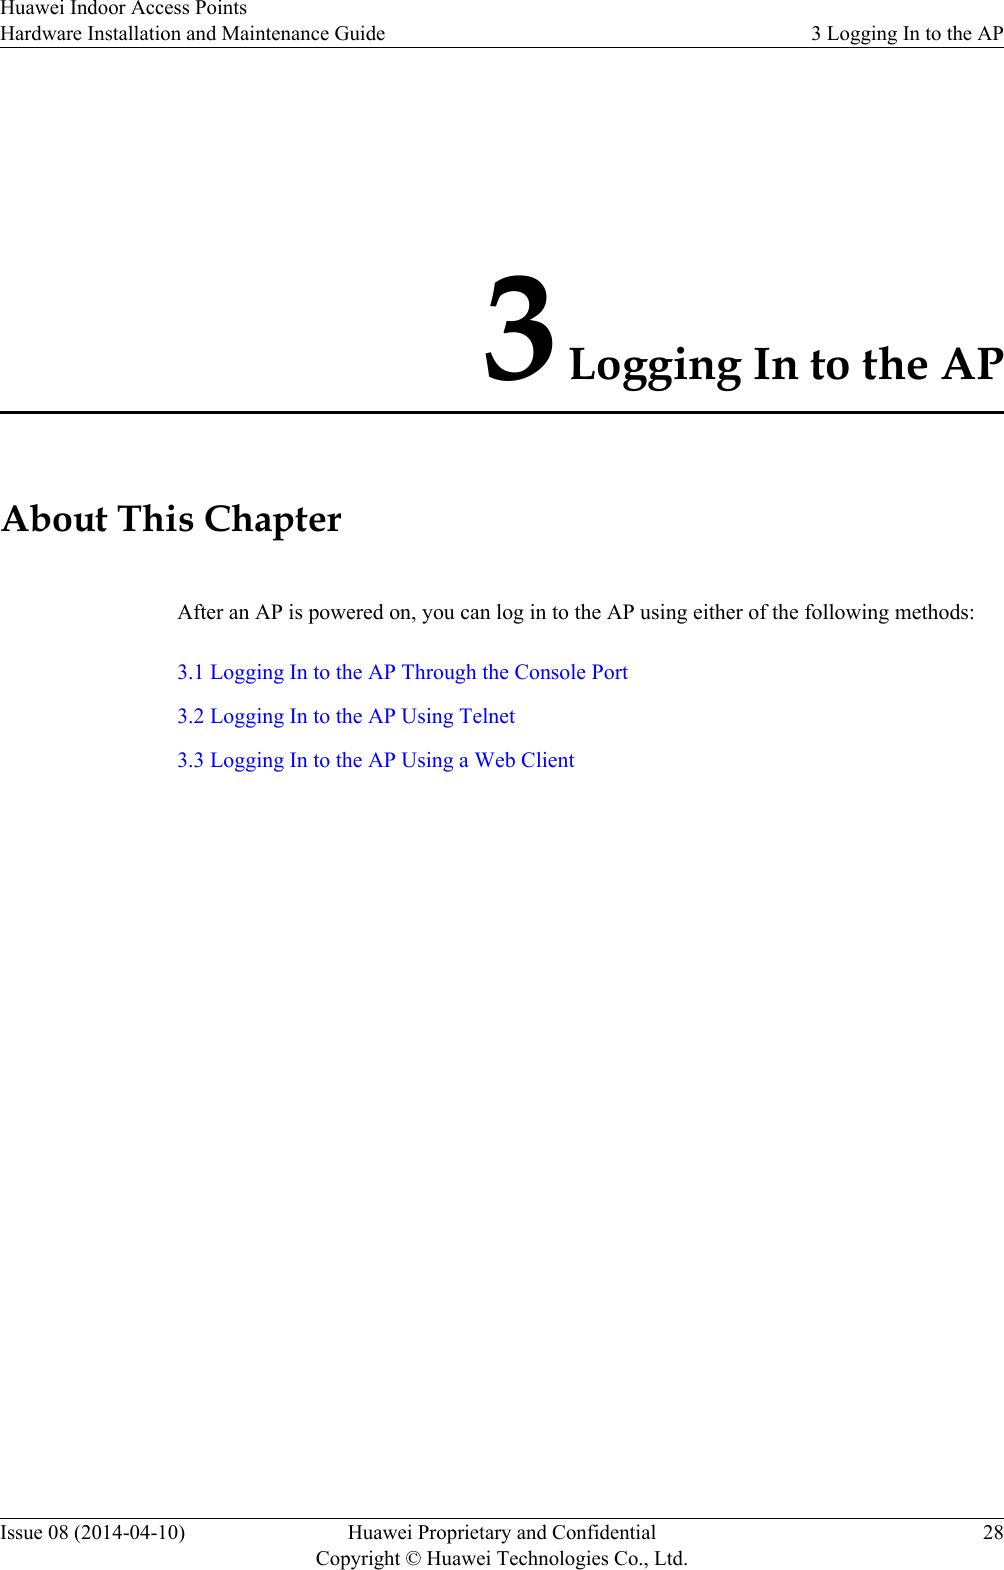 3 Logging In to the APAbout This ChapterAfter an AP is powered on, you can log in to the AP using either of the following methods:3.1 Logging In to the AP Through the Console Port3.2 Logging In to the AP Using Telnet3.3 Logging In to the AP Using a Web ClientHuawei Indoor Access PointsHardware Installation and Maintenance Guide 3 Logging In to the APIssue 08 (2014-04-10) Huawei Proprietary and ConfidentialCopyright © Huawei Technologies Co., Ltd.28